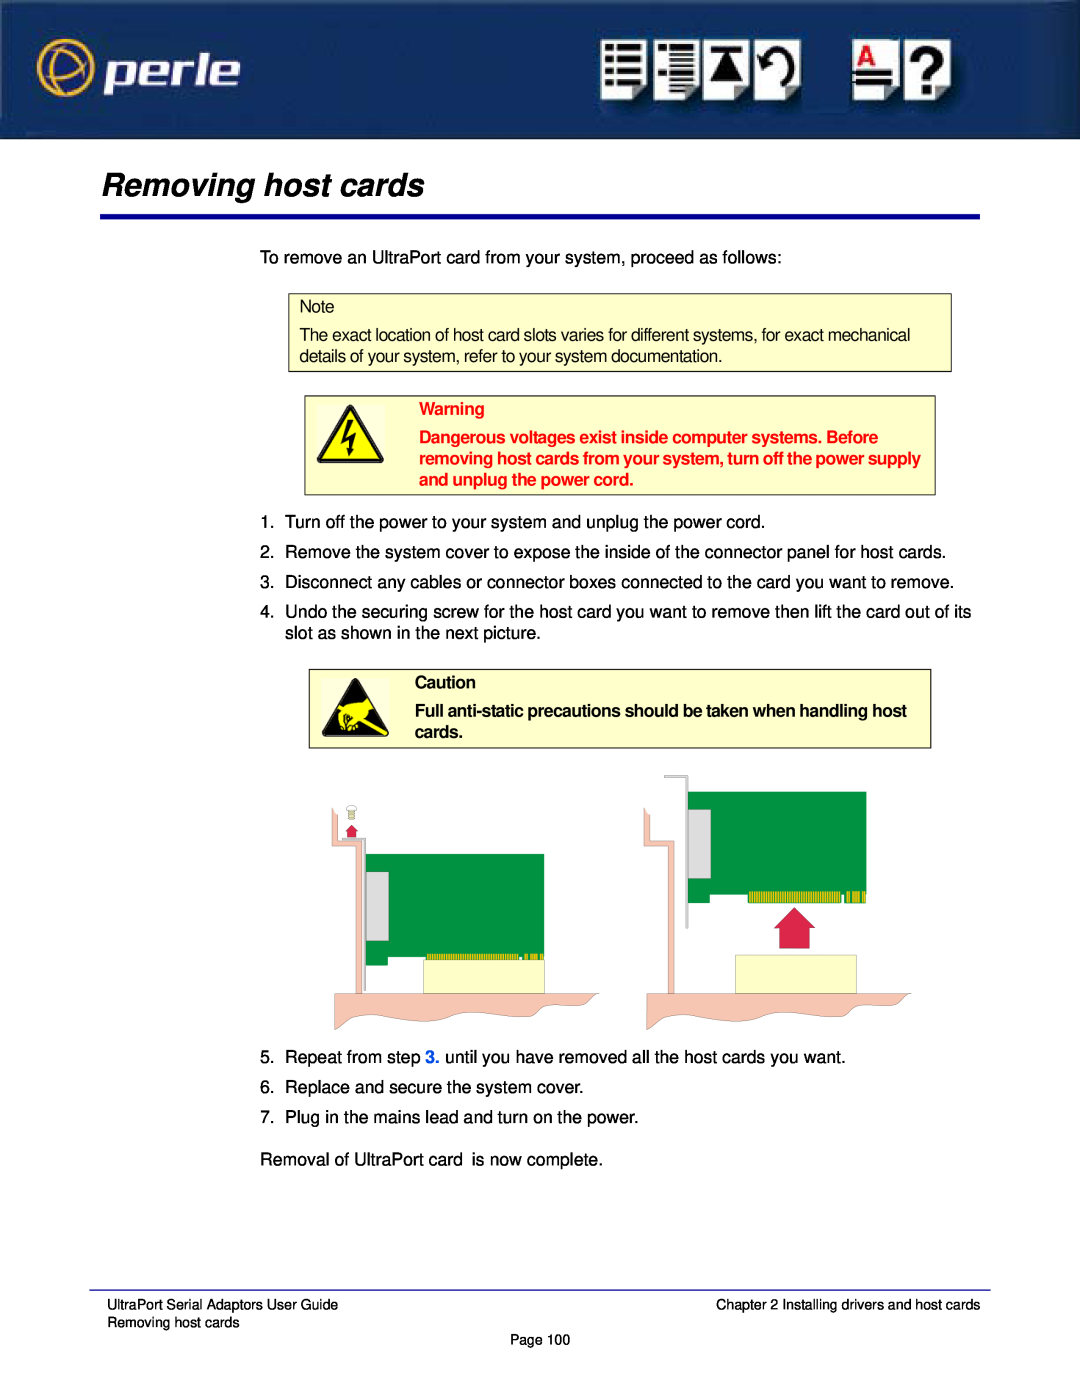 Perle Systems 5500152-23 manual Removing host cards, Full anti-static precautions should be taken when handling host cards 